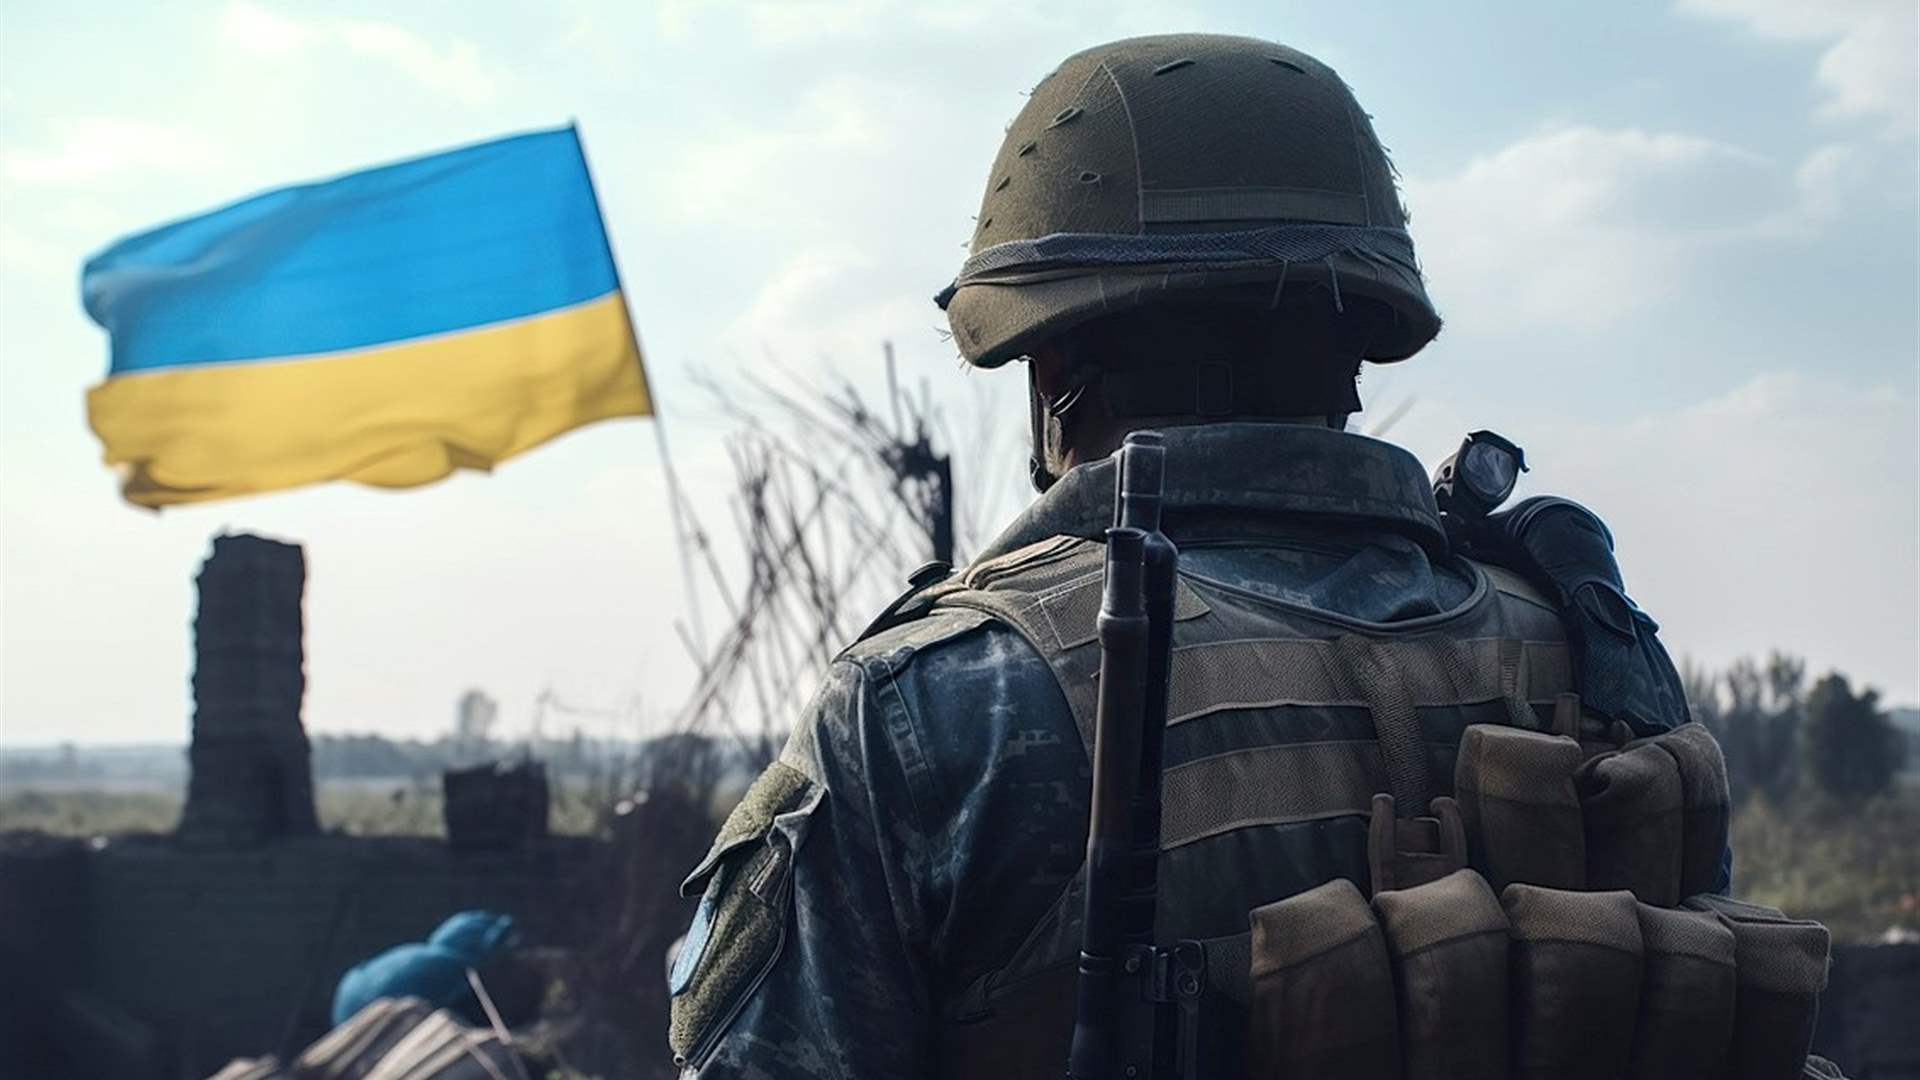 Ukraine announces recovery of seven square kilometers from Russian forces in past week 